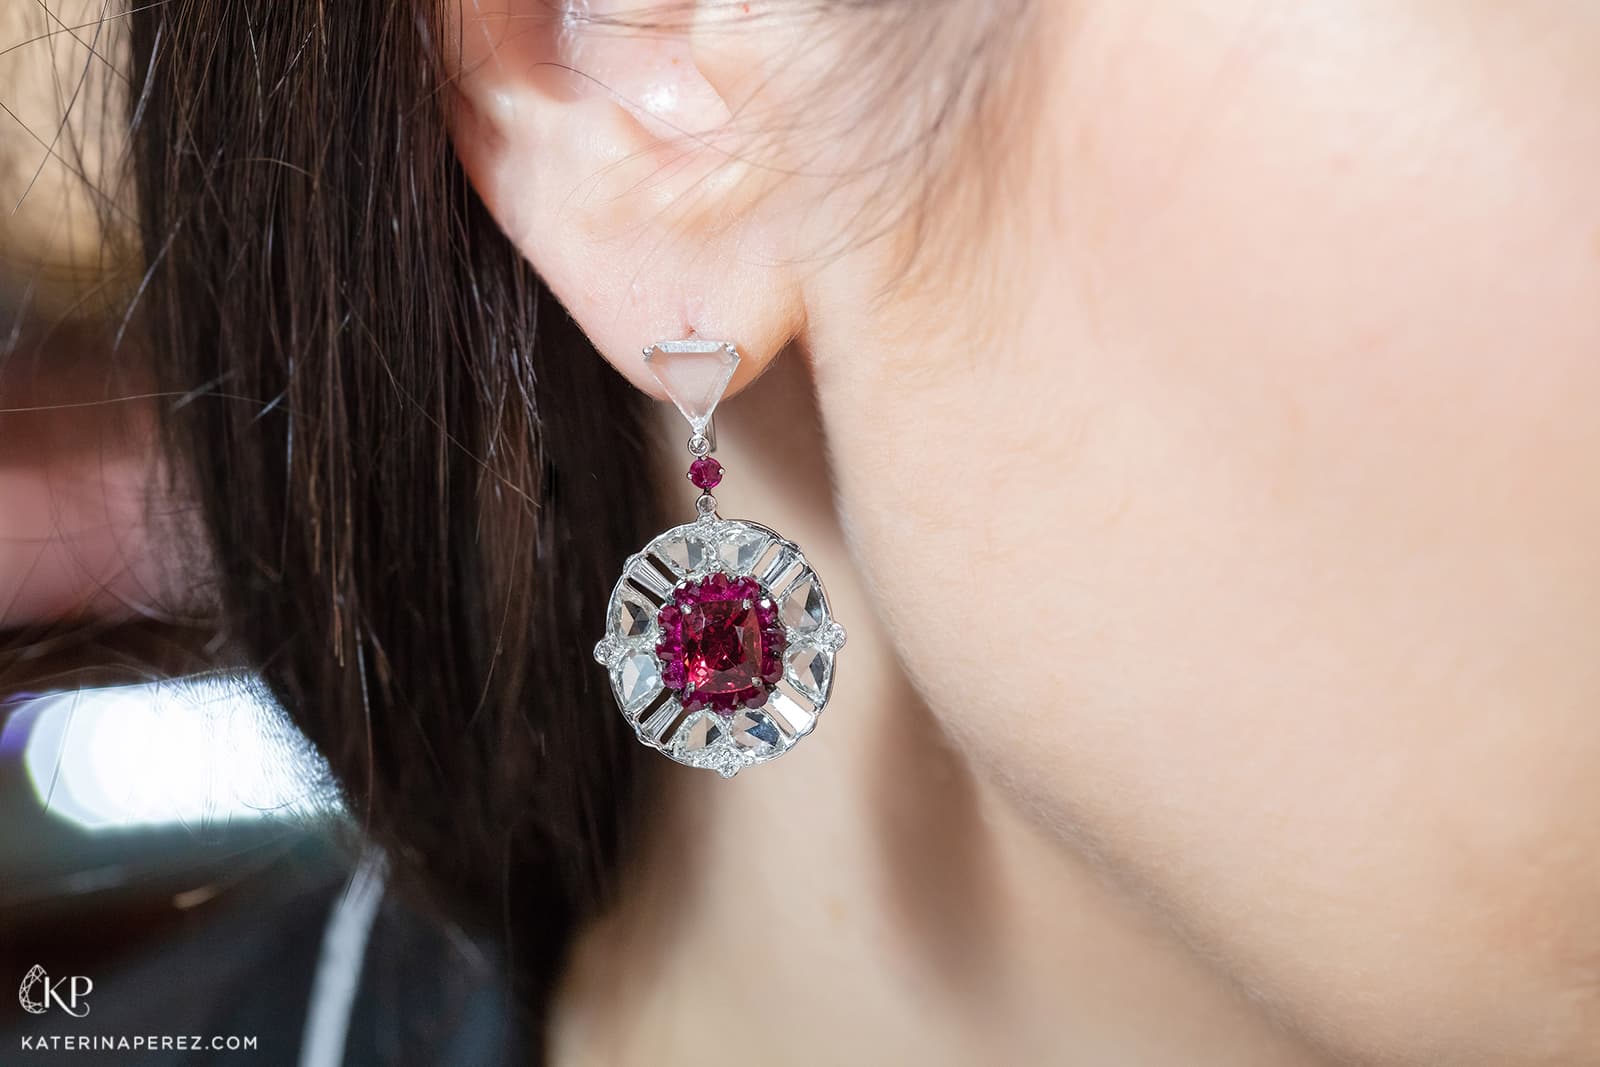 VAK earrings with non-treated Burmese spinel, non-treated rubies, and rose, baguette and brilliant cut diamonds